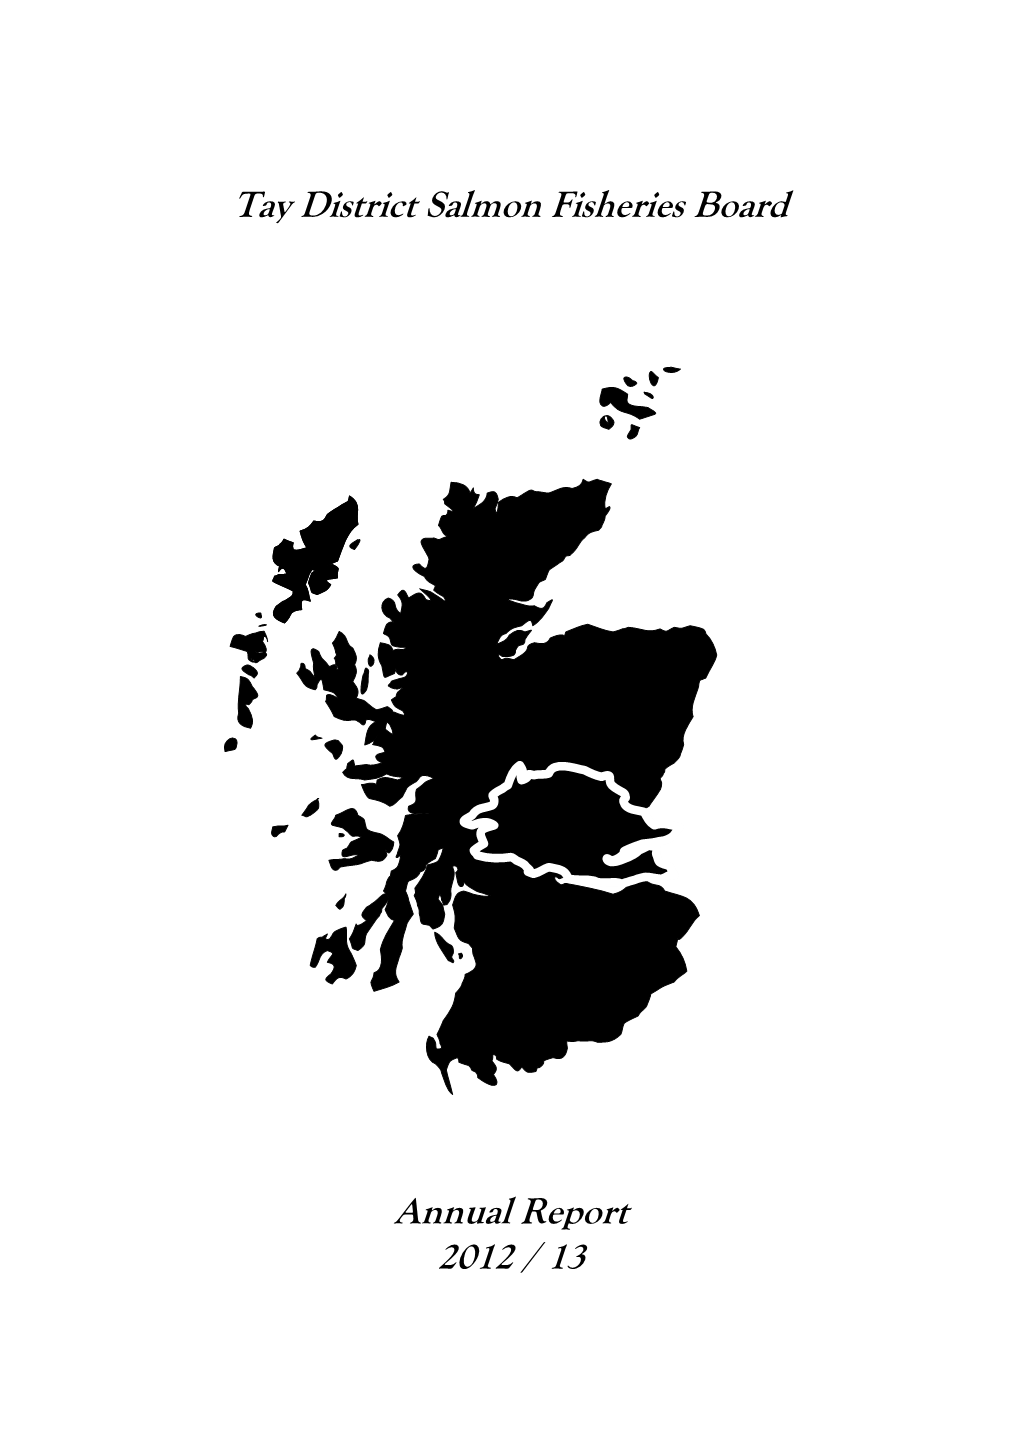 Tay District Salmon Fisheries Board Annual Report 2012 / 13